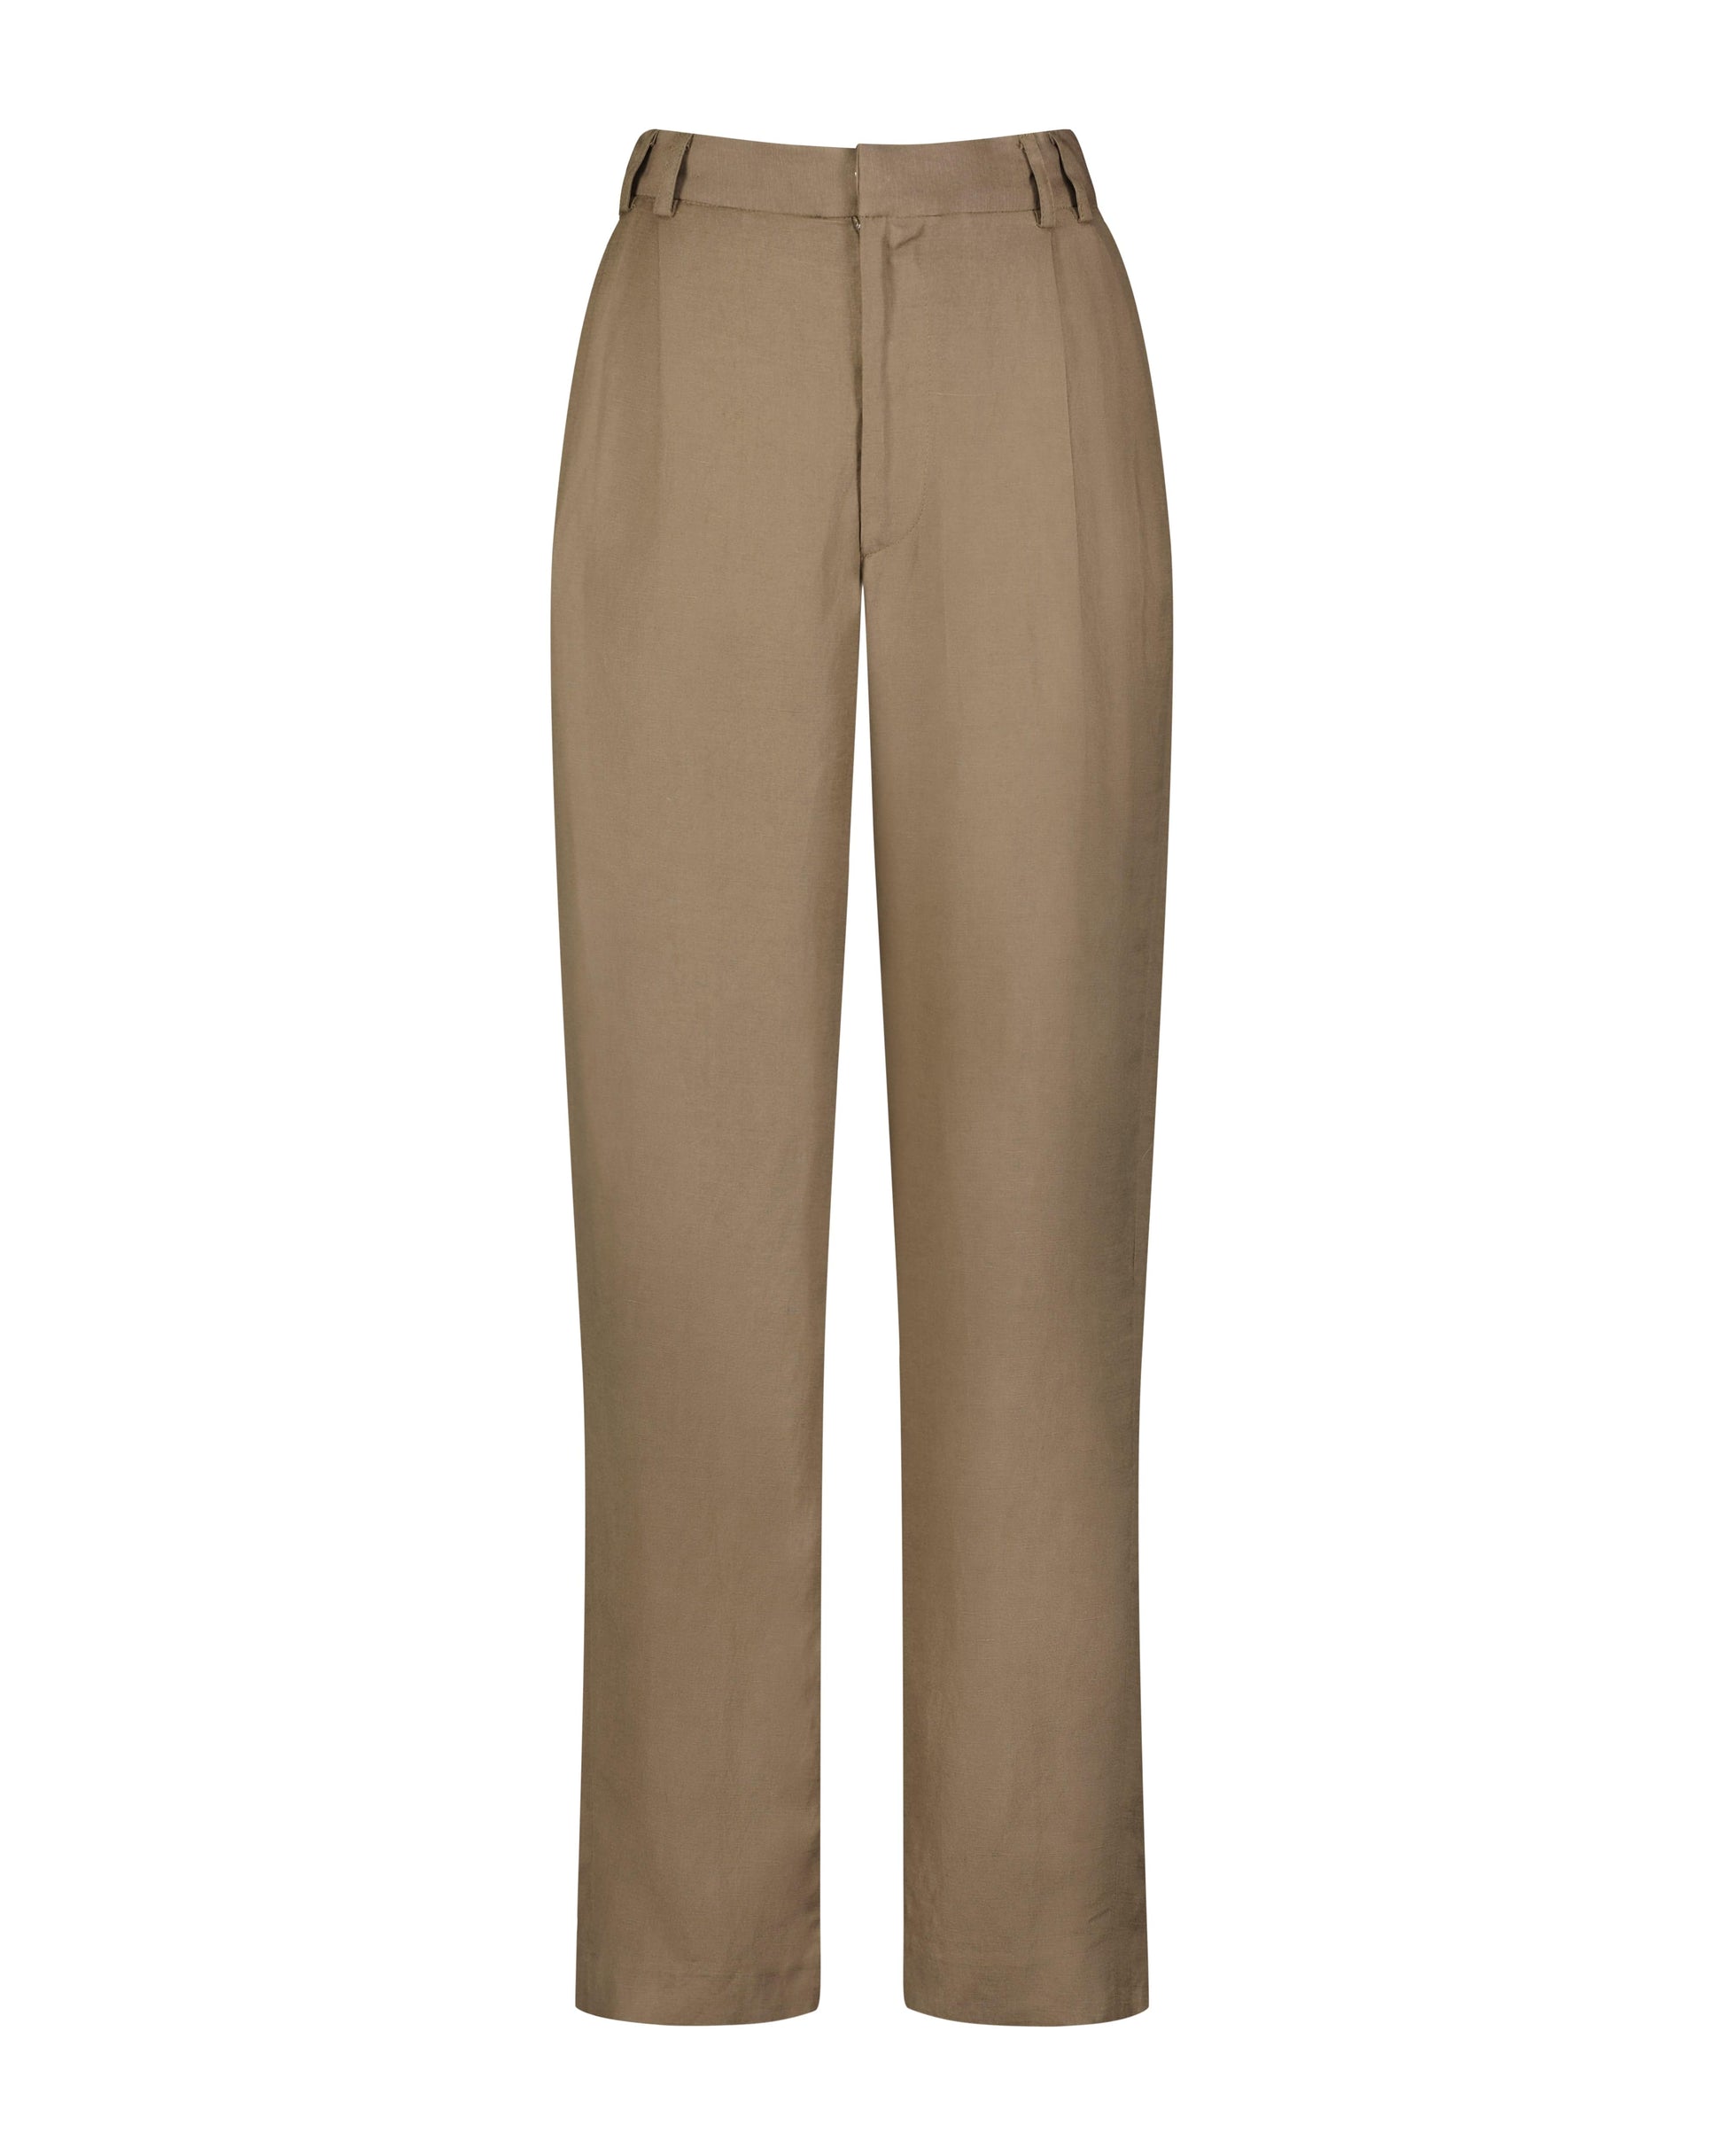 Sophia Pant in Linen Blend Pants CHRISTINE ALCALAY   